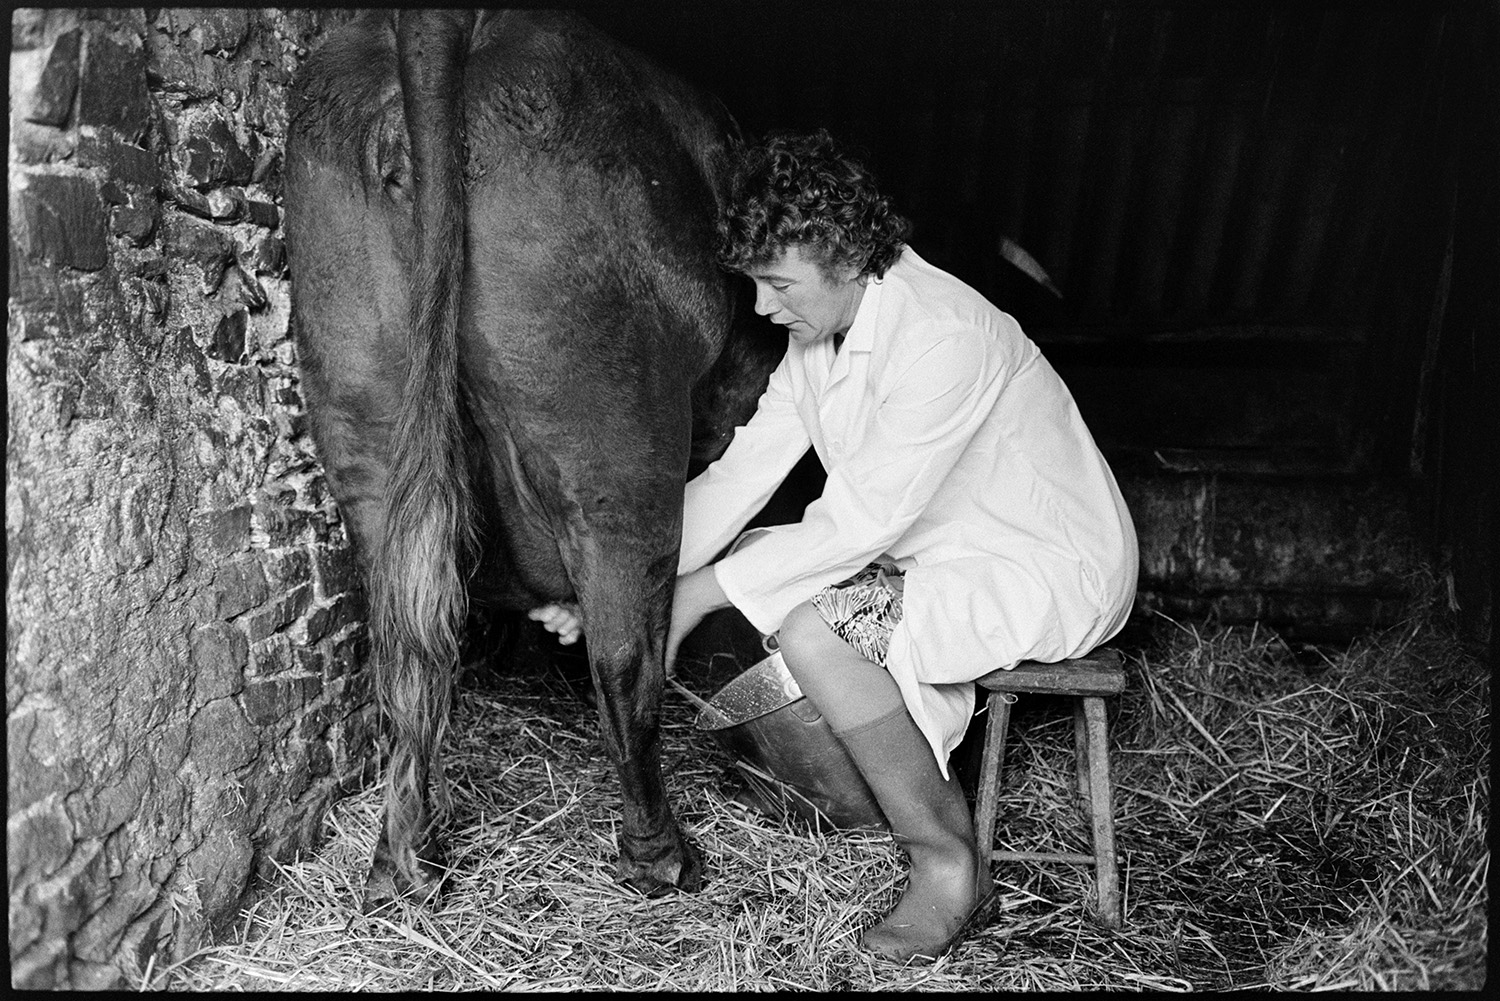 Horned Devon Red cows being milked by woman.
[Mrs Elworthy sitting on a stool hand milking a cow, in a barn at Narracott, Hollocombe.]